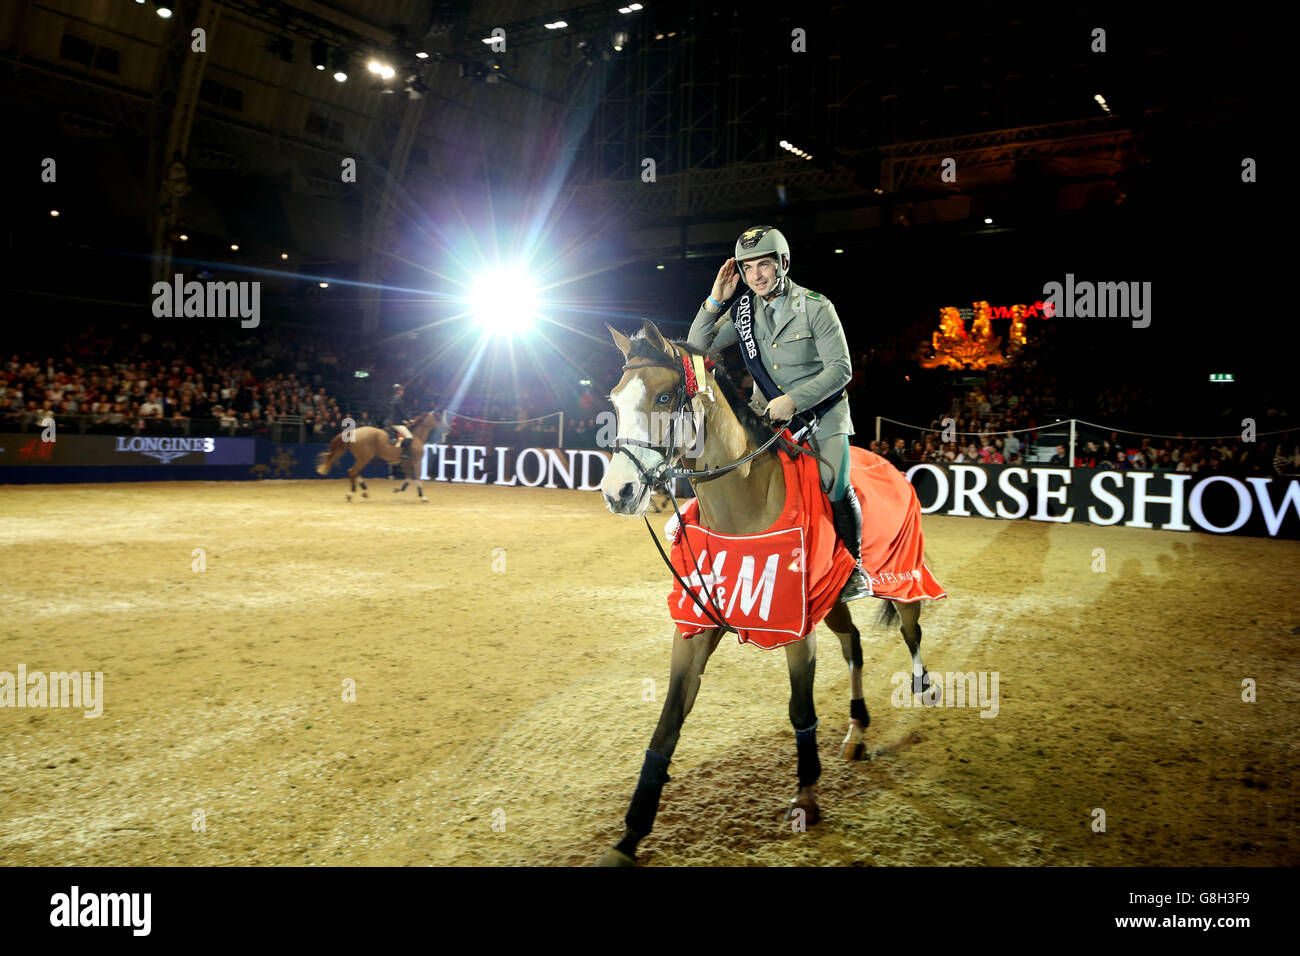 Italy's Emanuele Gaudiano riding Admara wins the Longines FEI World Cup during day six of the Olympia London International Horse Show at the Olympia Exhibition Centre, London. Stock Photo